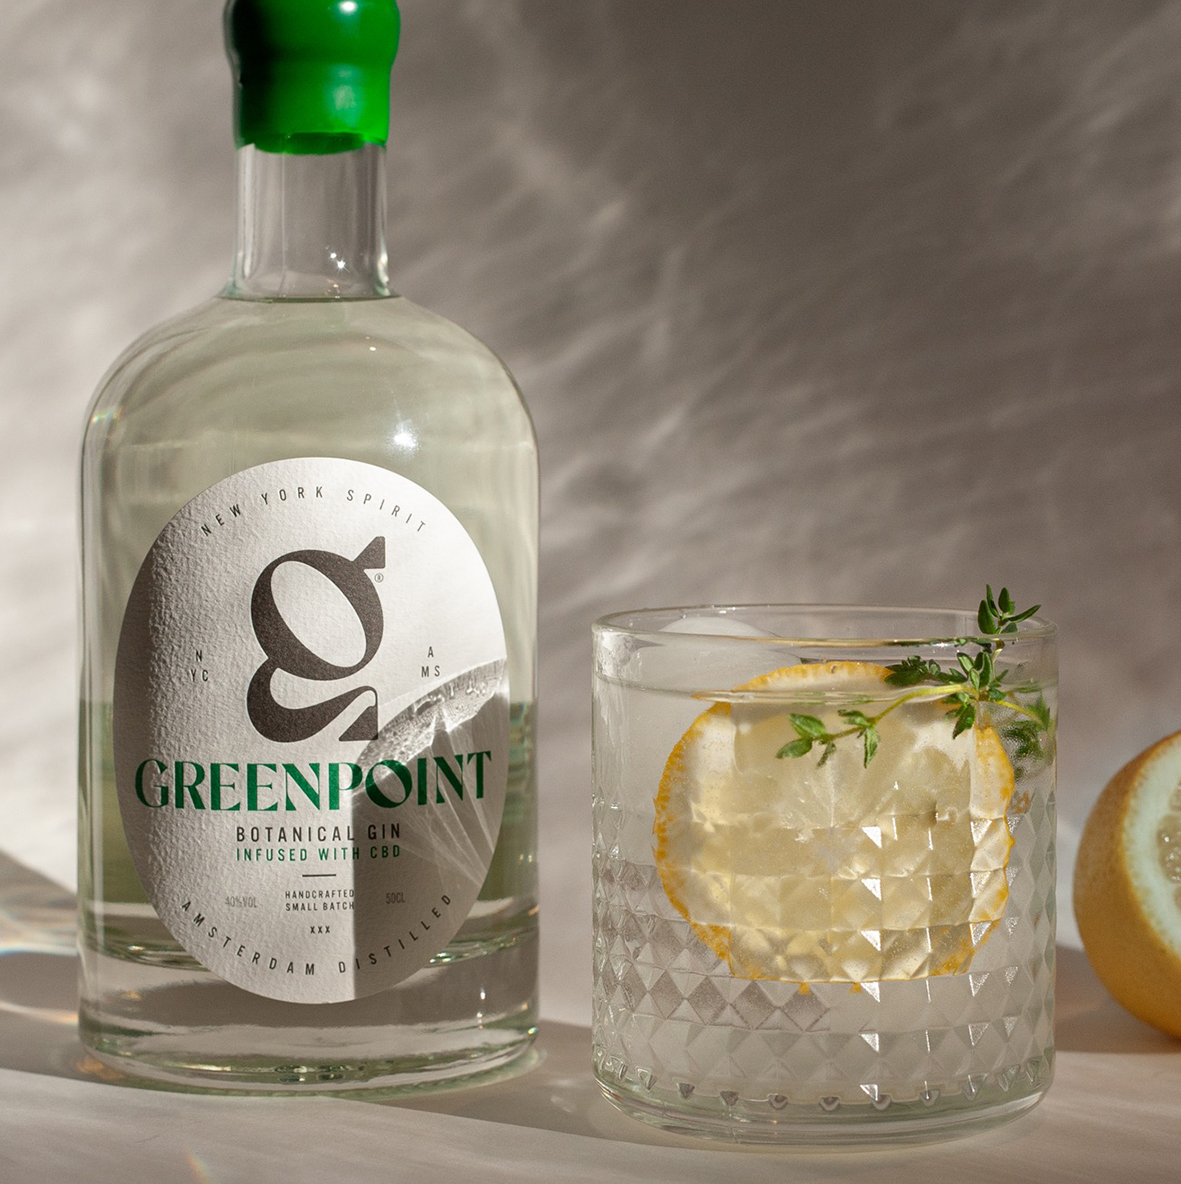 Greenpoint General Creates Brand Design for CBD Infused Botanical Gin